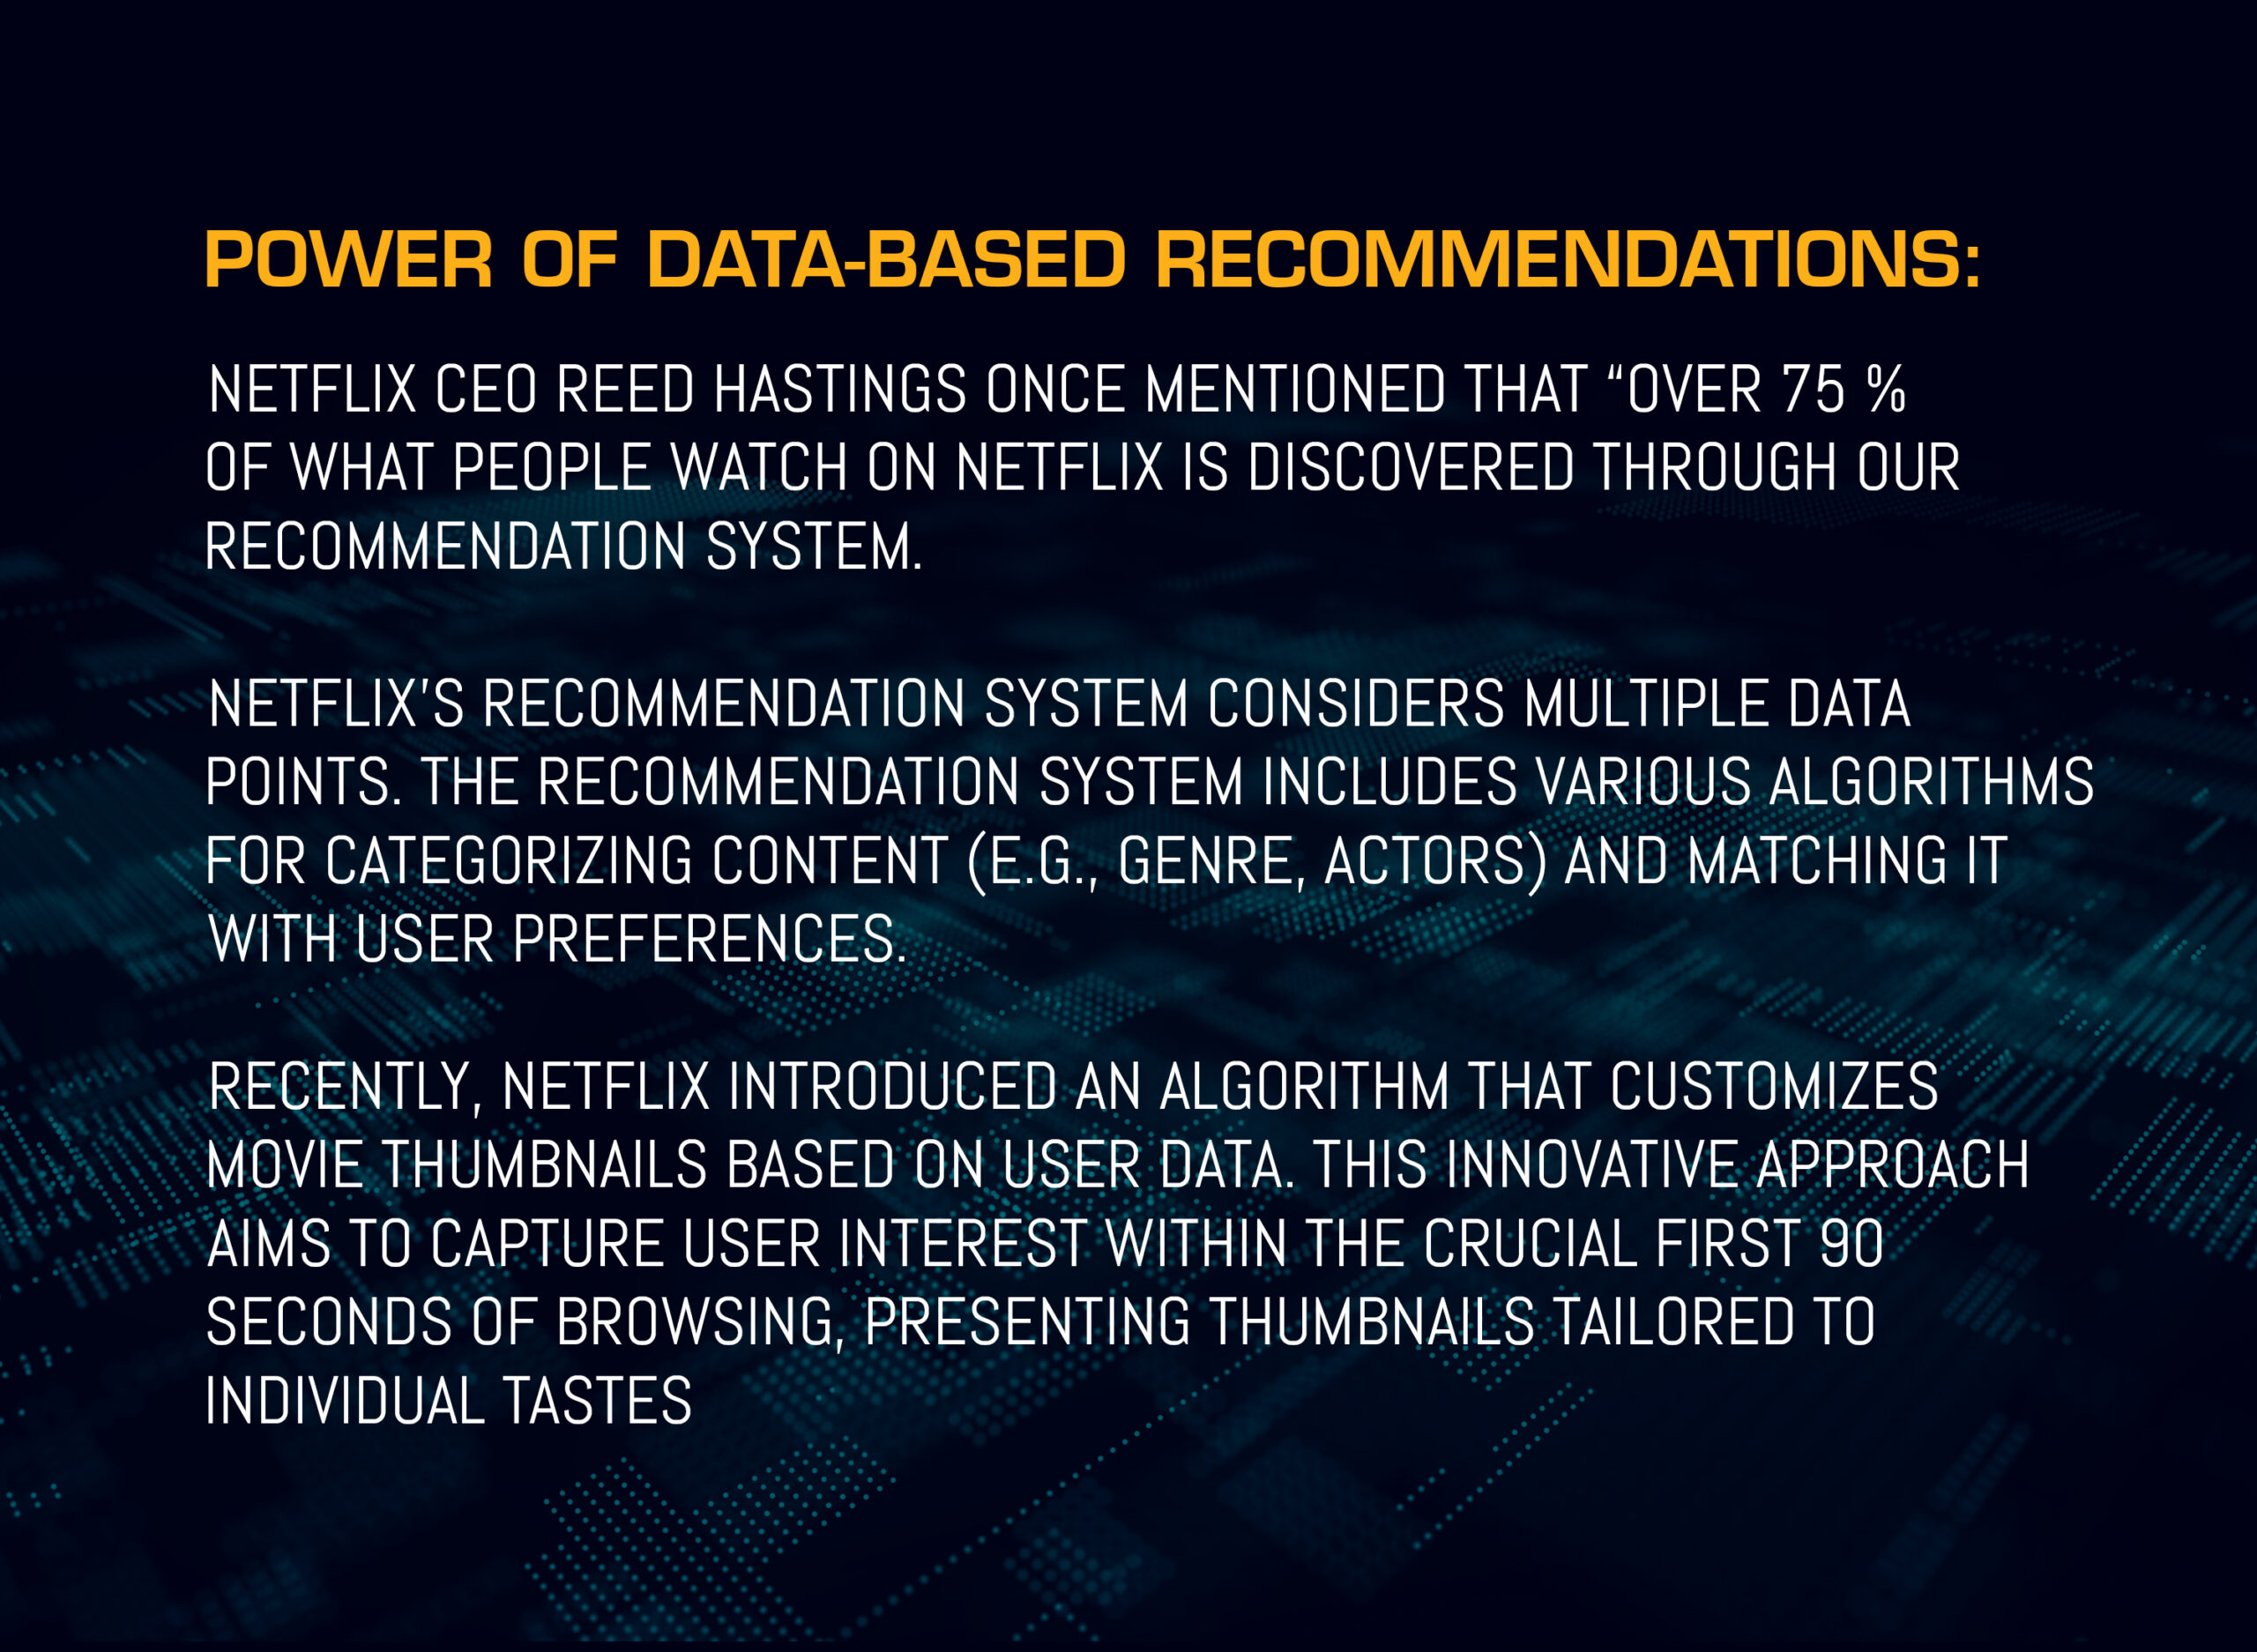 In 2016, Netflix CEO Reed Hastings mentioned that “Over 75% of what people watch on Netflix is discovered through our recommendation system.” Netflix's recommendation system considers multiple data points. The recommendation system includes various algorithms for categorizing content (e.g., genre, actors) and matching it with user preferences. Recently, Netflix introduced an algorithm that customizes movie thumbnails based on user data. This innovative approach aims to capture user interest within the crucial first 90 seconds of browsing, presenting thumbnails tailored to individual tastes